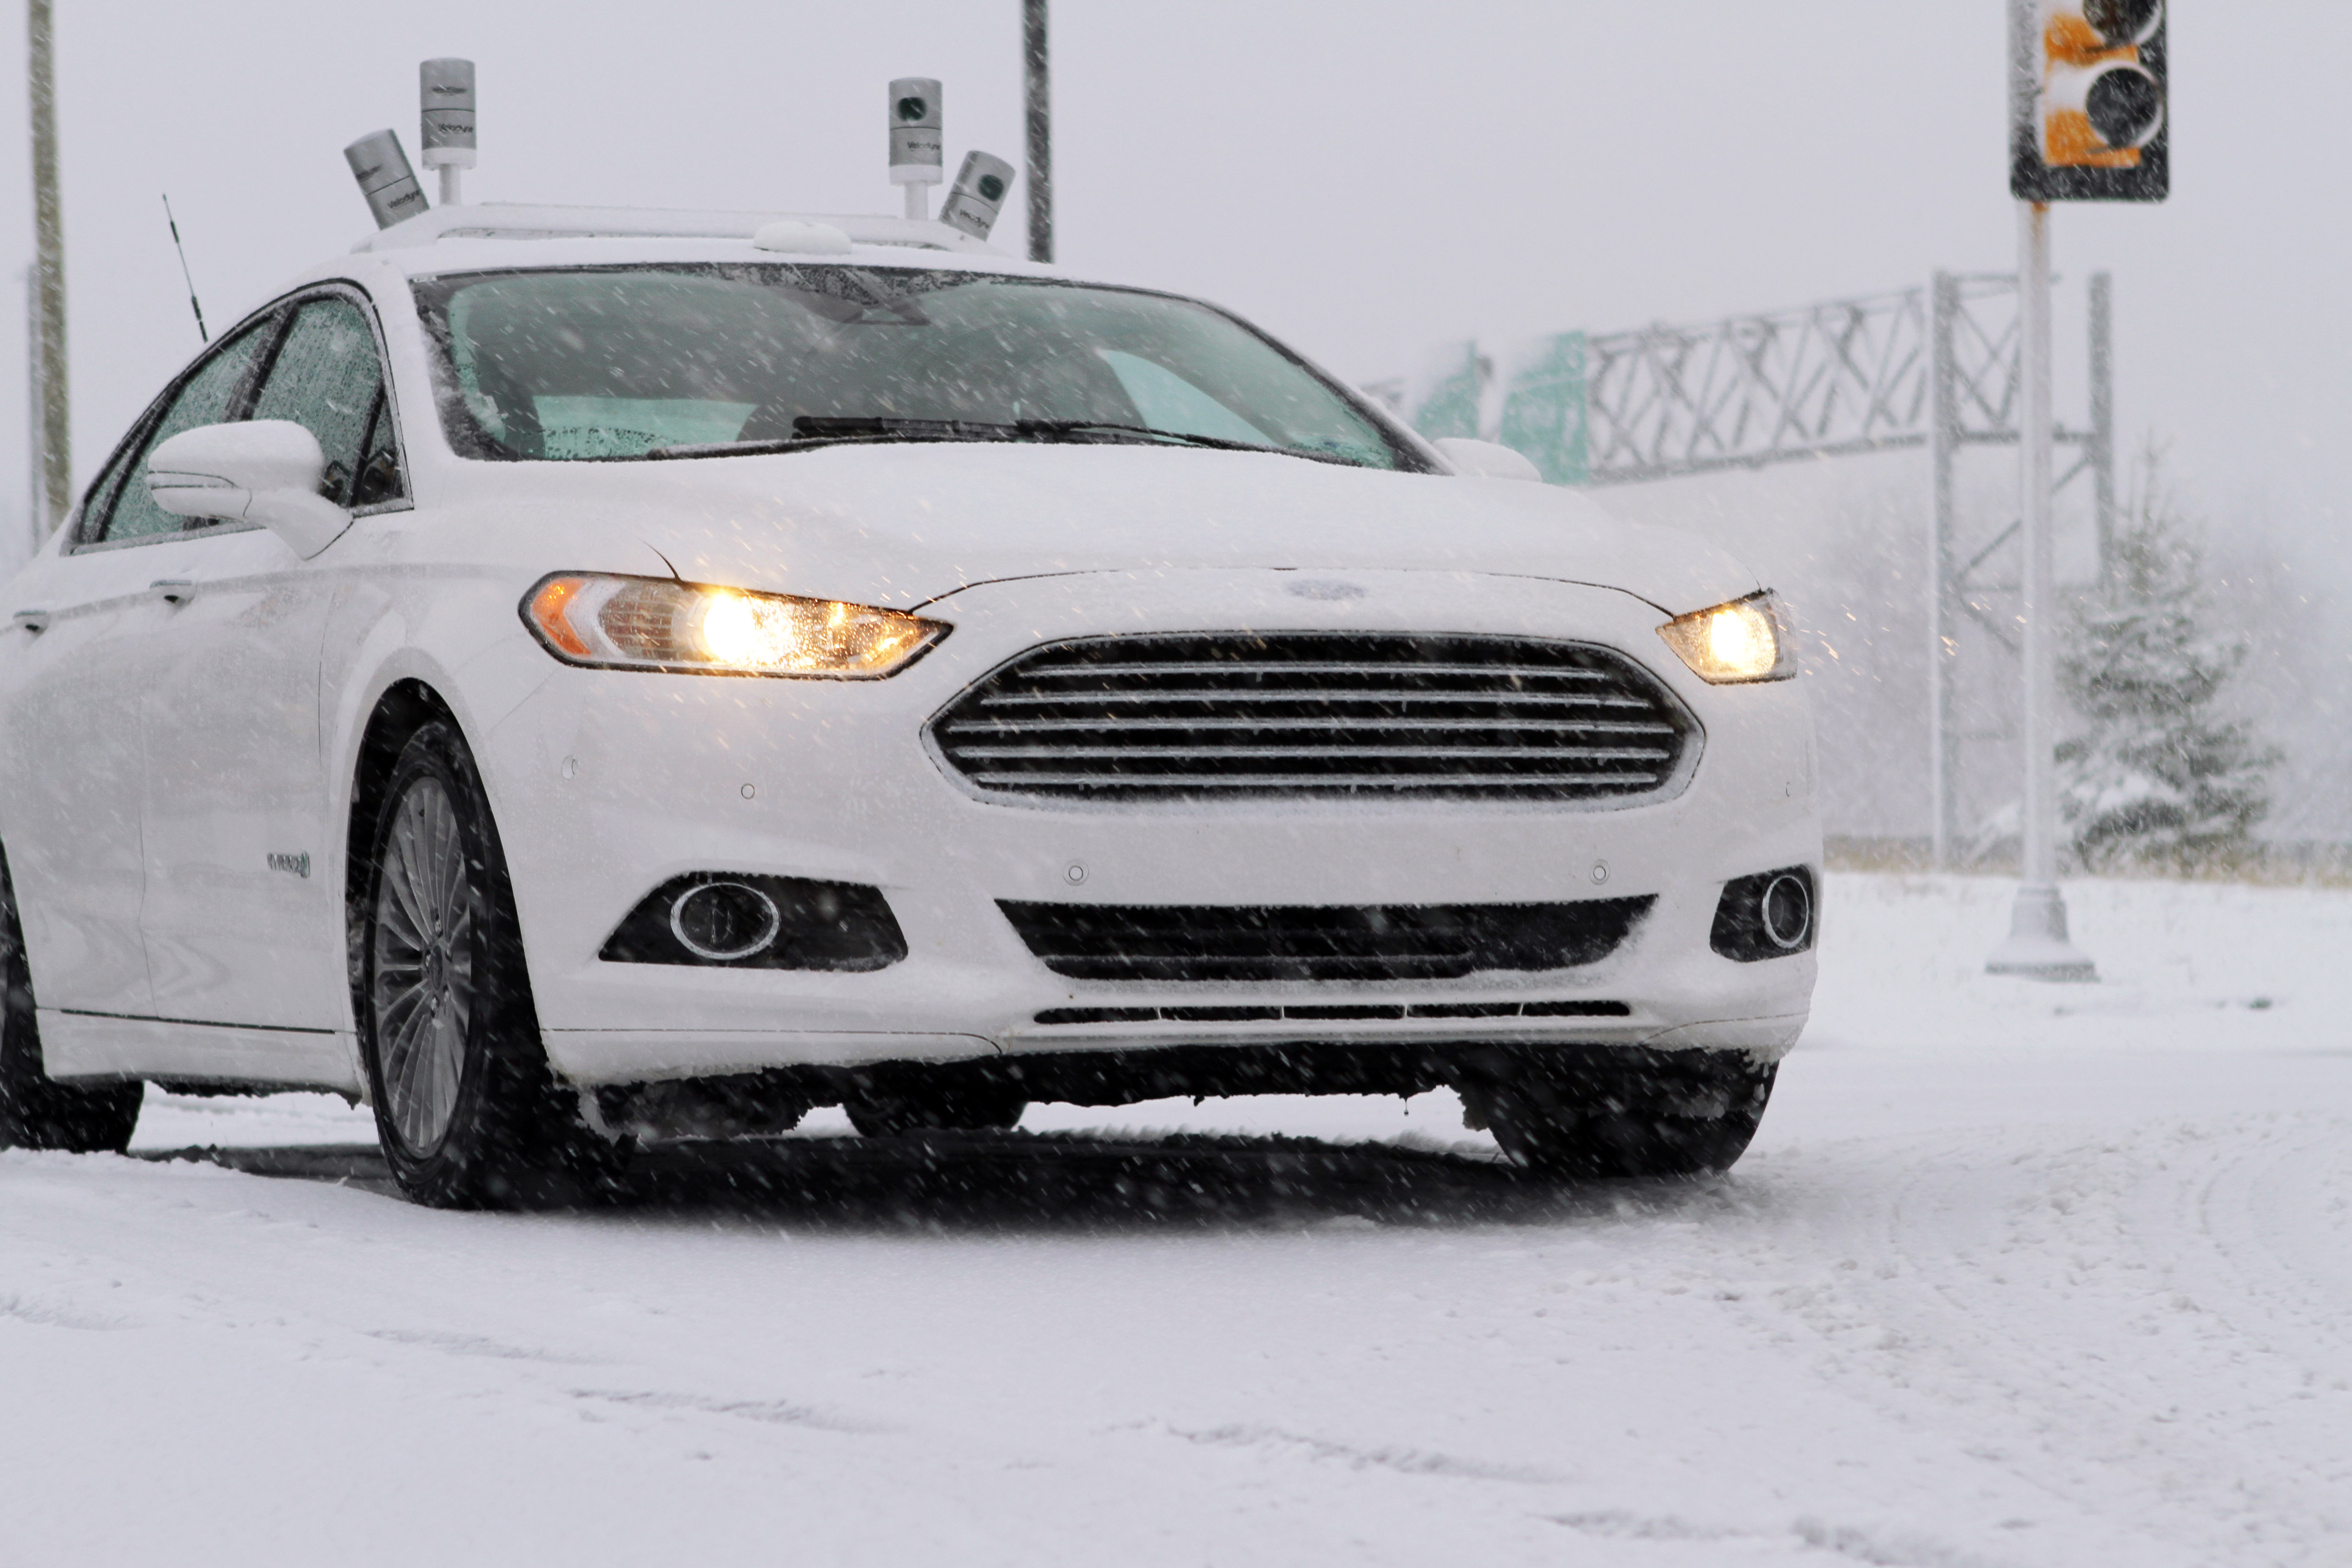 To navigate snowy roads, Ford autonomous vehicles are equipped with high-resolution 3D maps – complete with information about the road and what’s above it, including road markings, signs, geography, landmarks and topography.